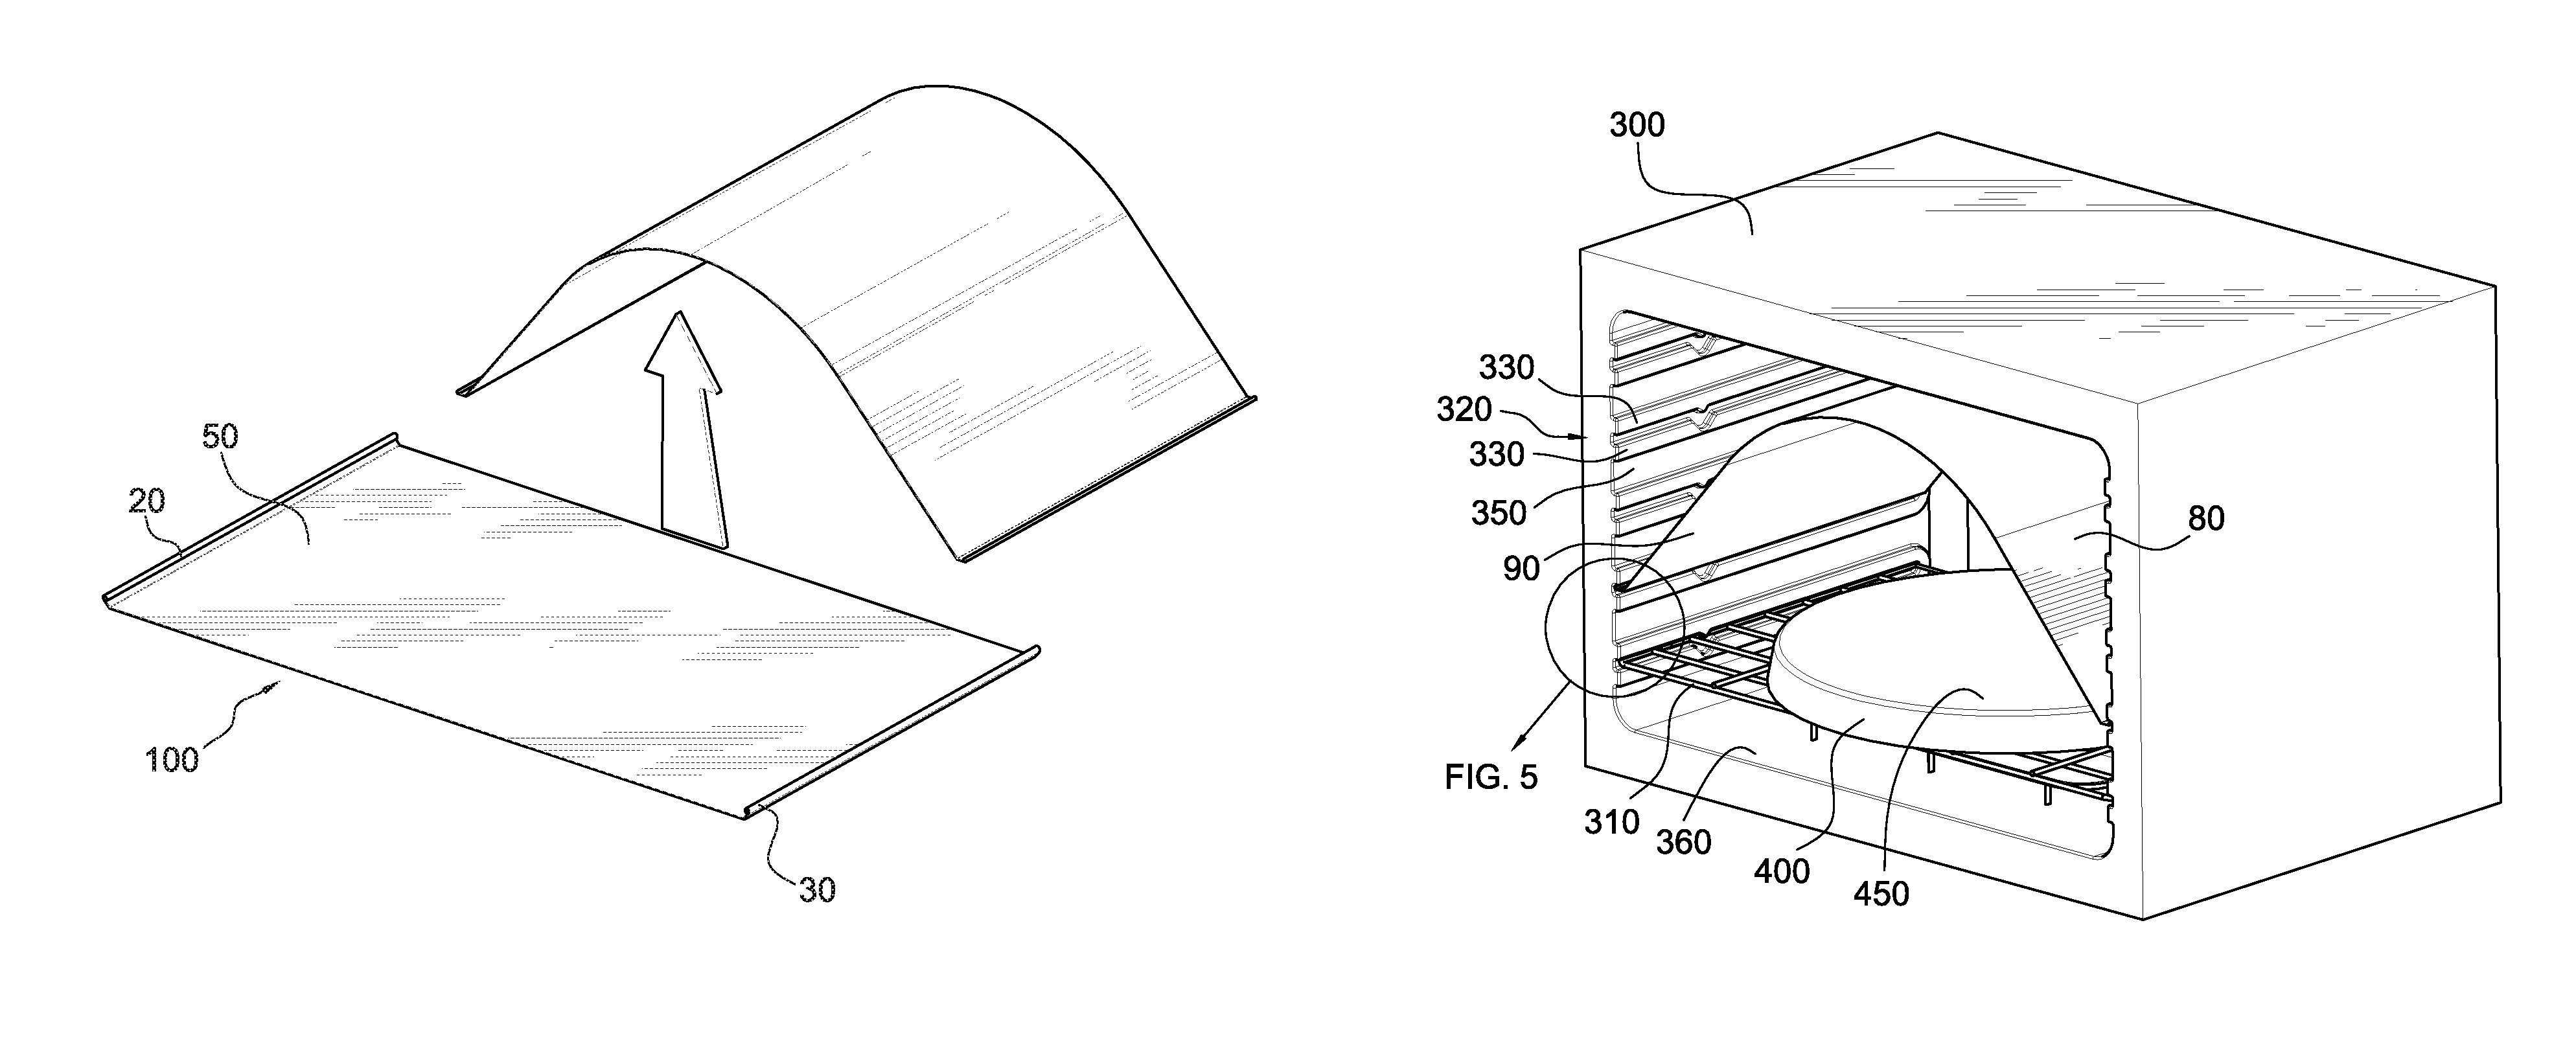 Universal convection manipulation device and methods